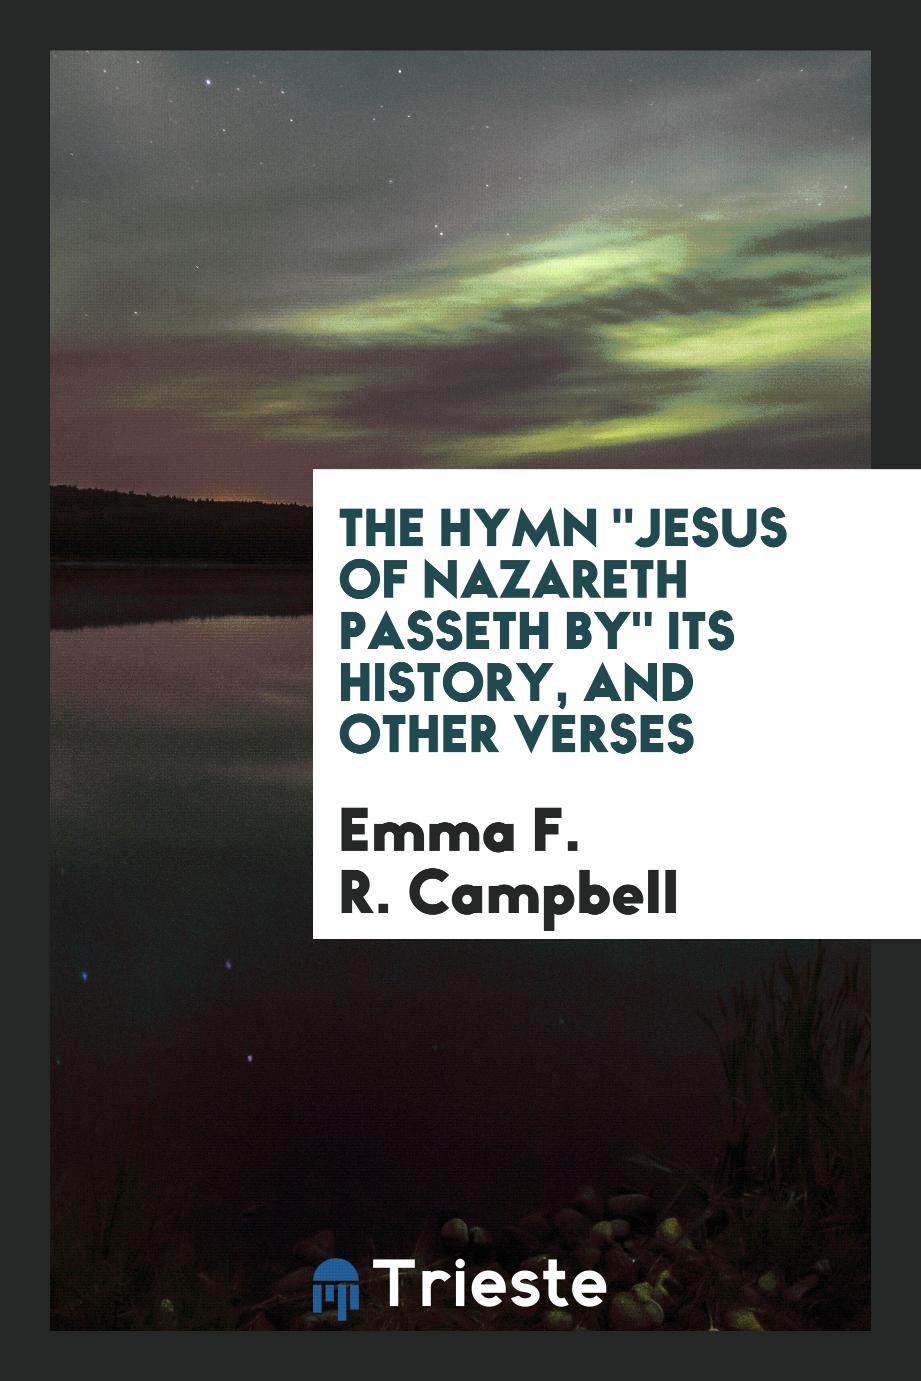 The Hymn "Jesus of Nazareth Passeth by" Its History, and Other Verses